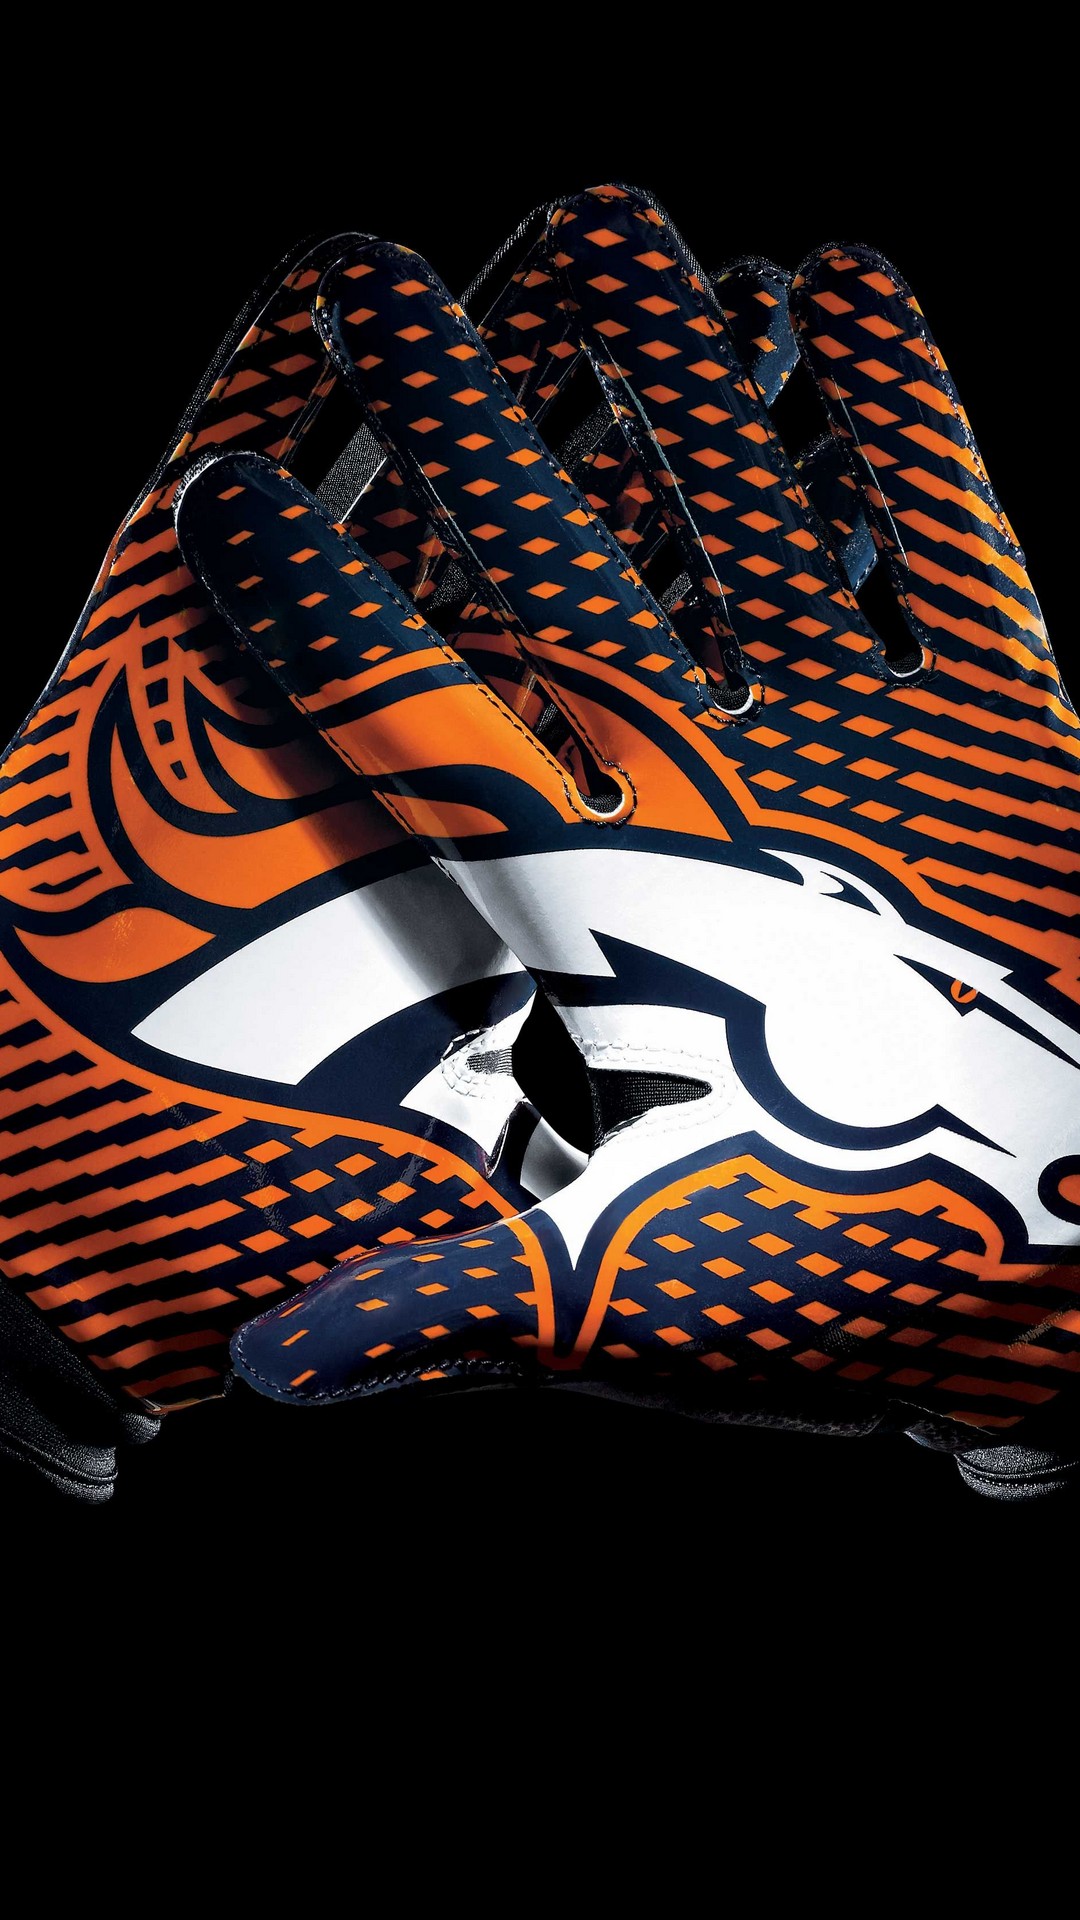 Denver Broncos iPhone Wallpaper in HD with high-resolution 1080x1920 pixel. Download and set as wallpaper for Apple iPhone X, XS Max, XR, 8, 7, 6, SE, iPad, Android